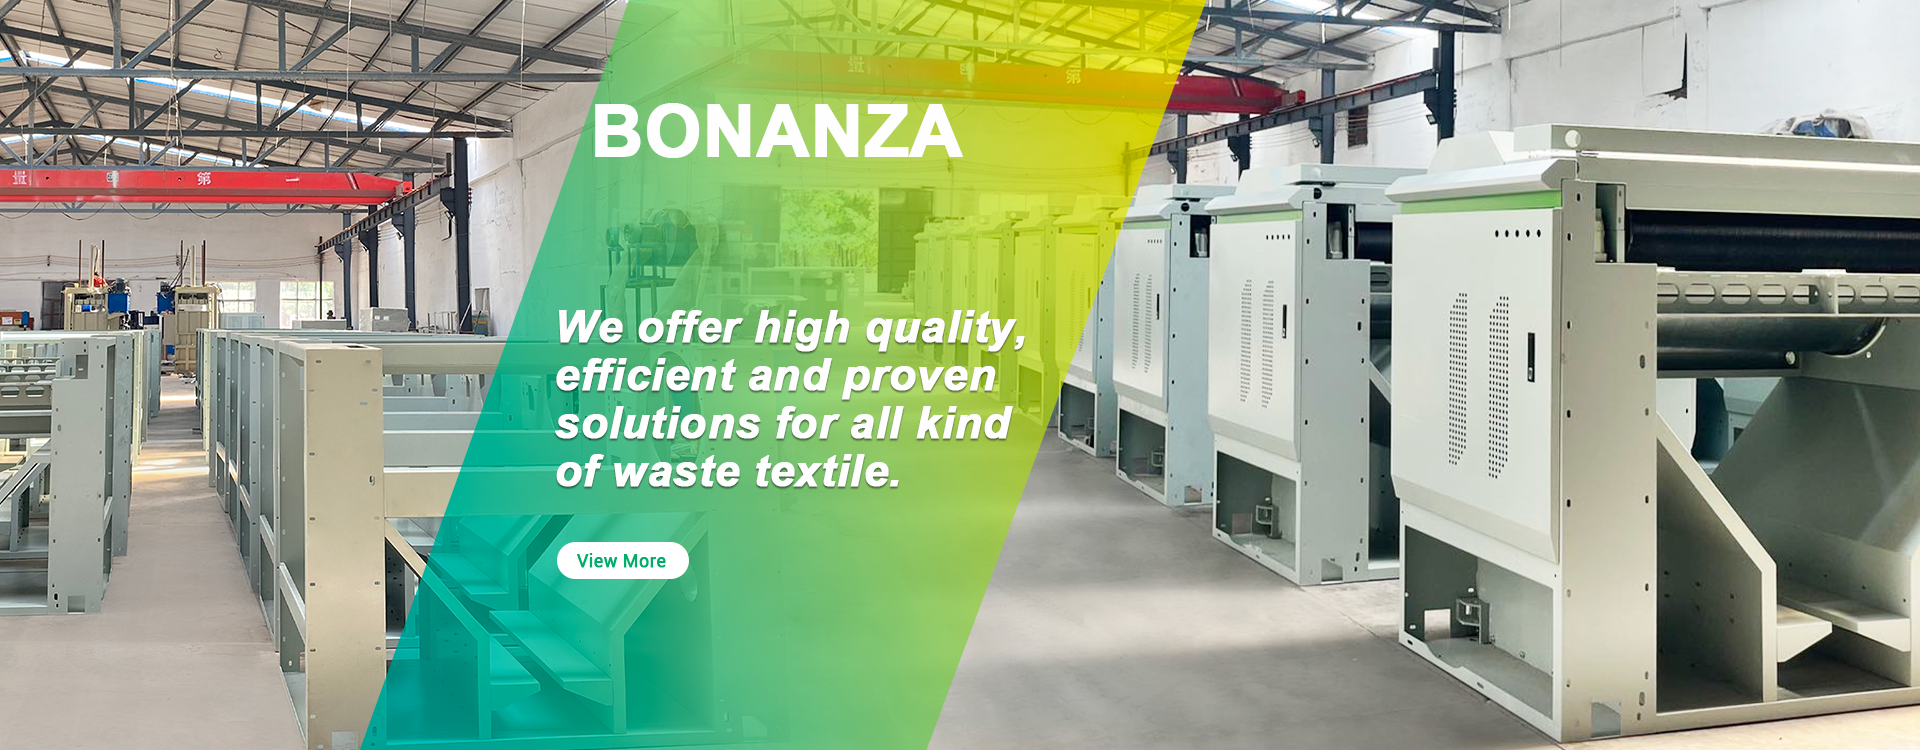 Dingzhen Offer high- quality waste textile Solutions